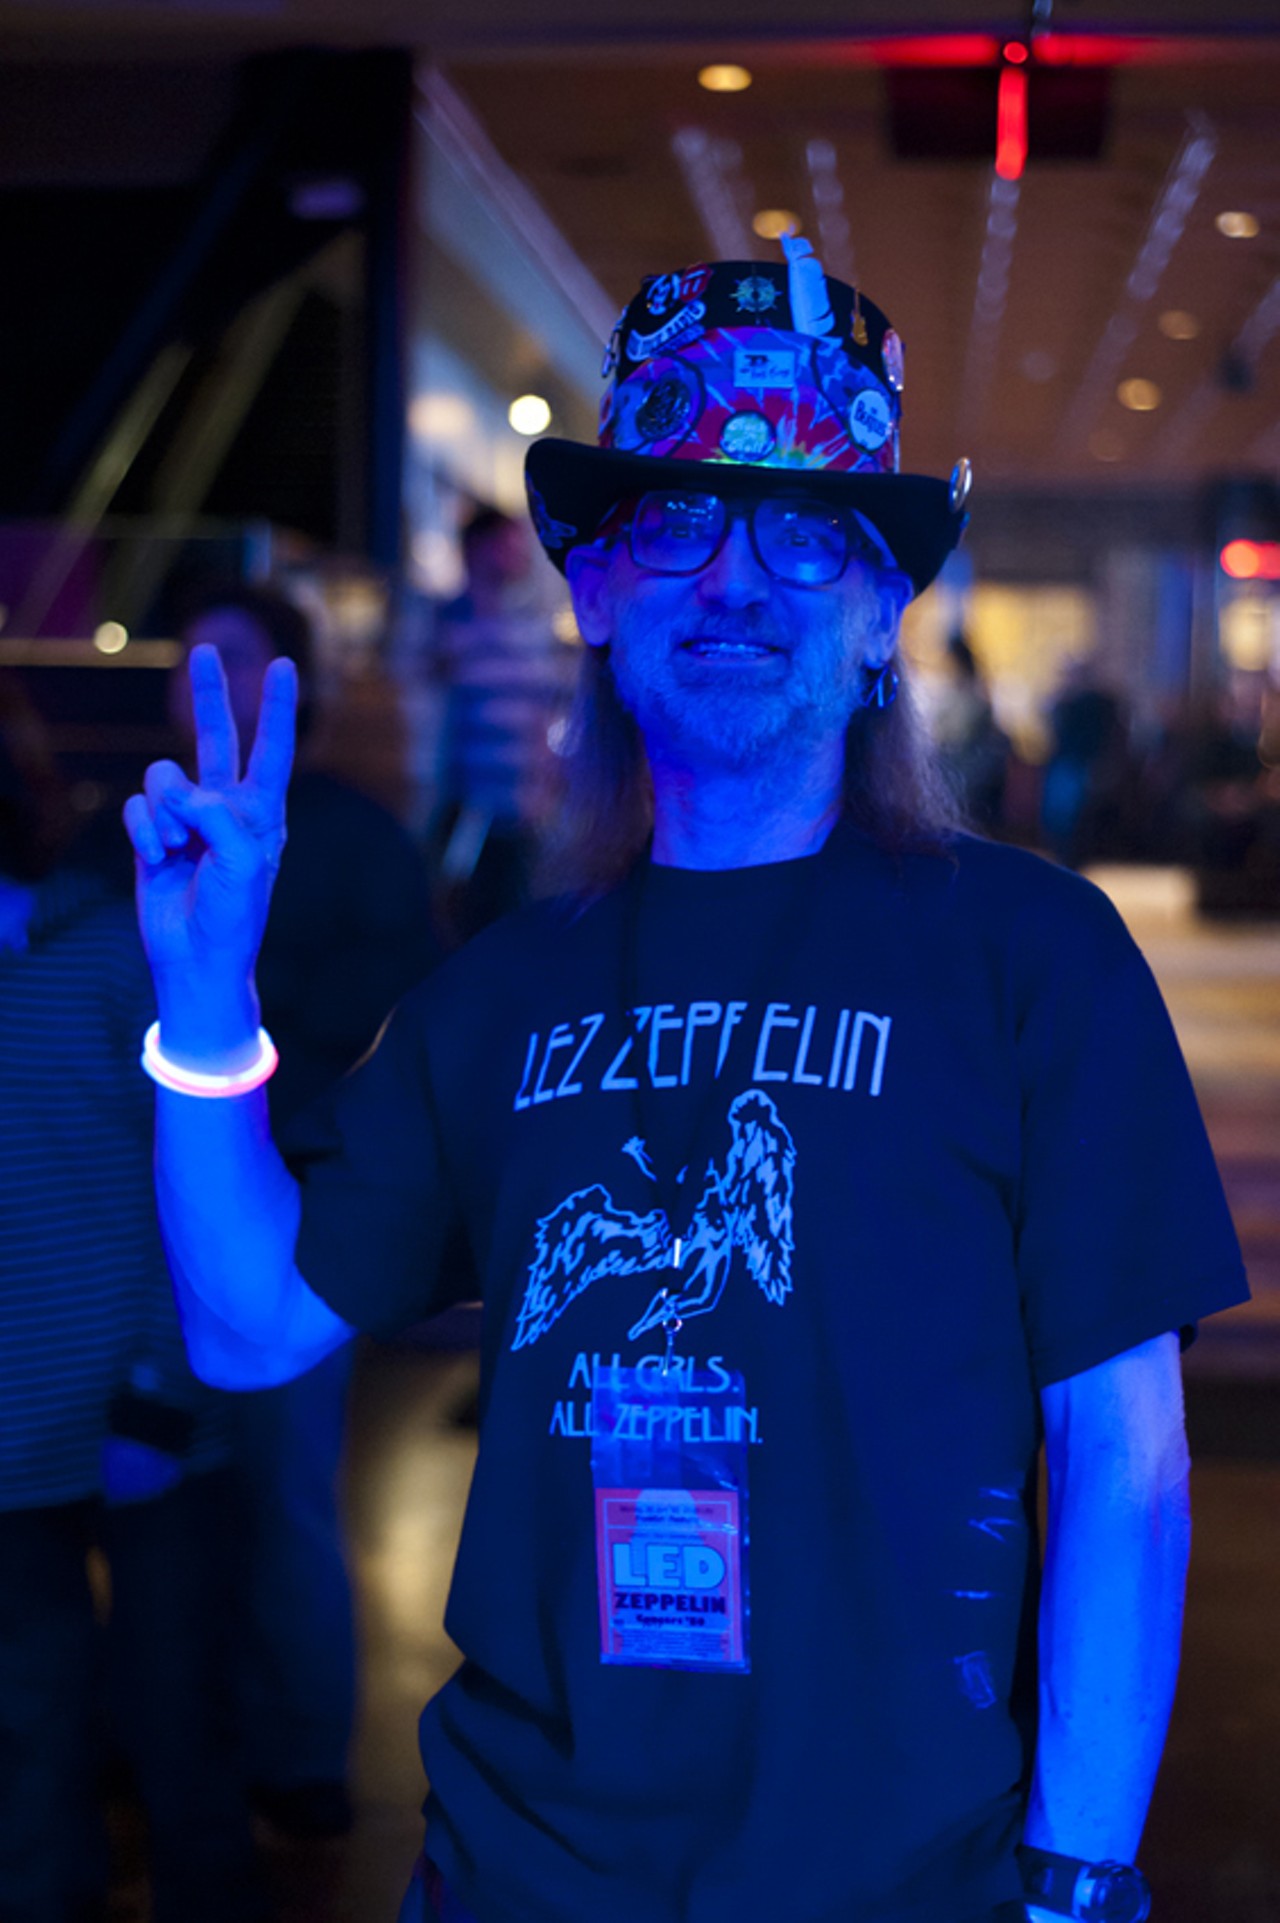 A Lez Zeppelin fan before the band hit the stage.